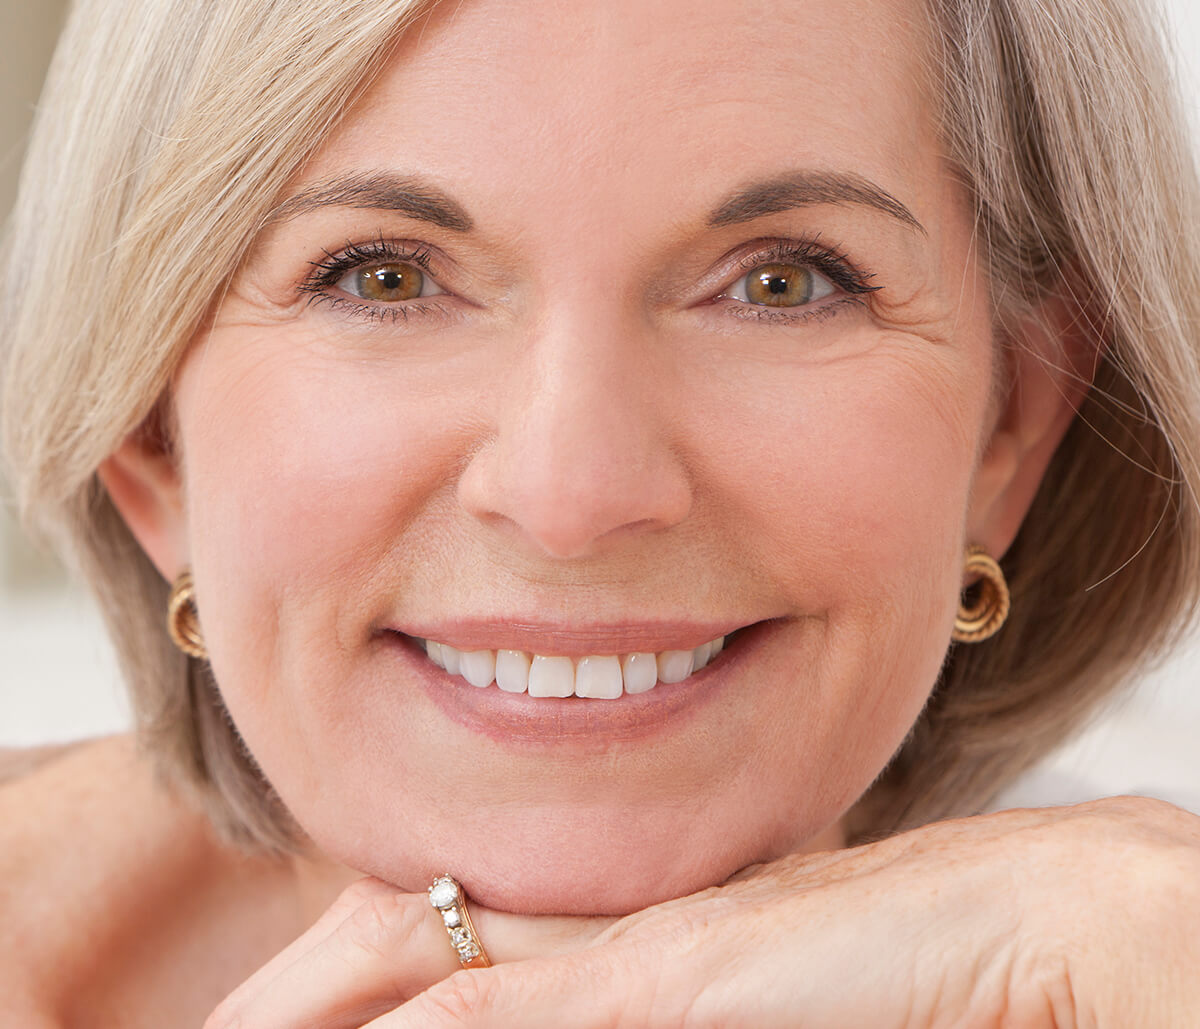 3 Signs Your Dentures Need Replacing with Quality Dentures